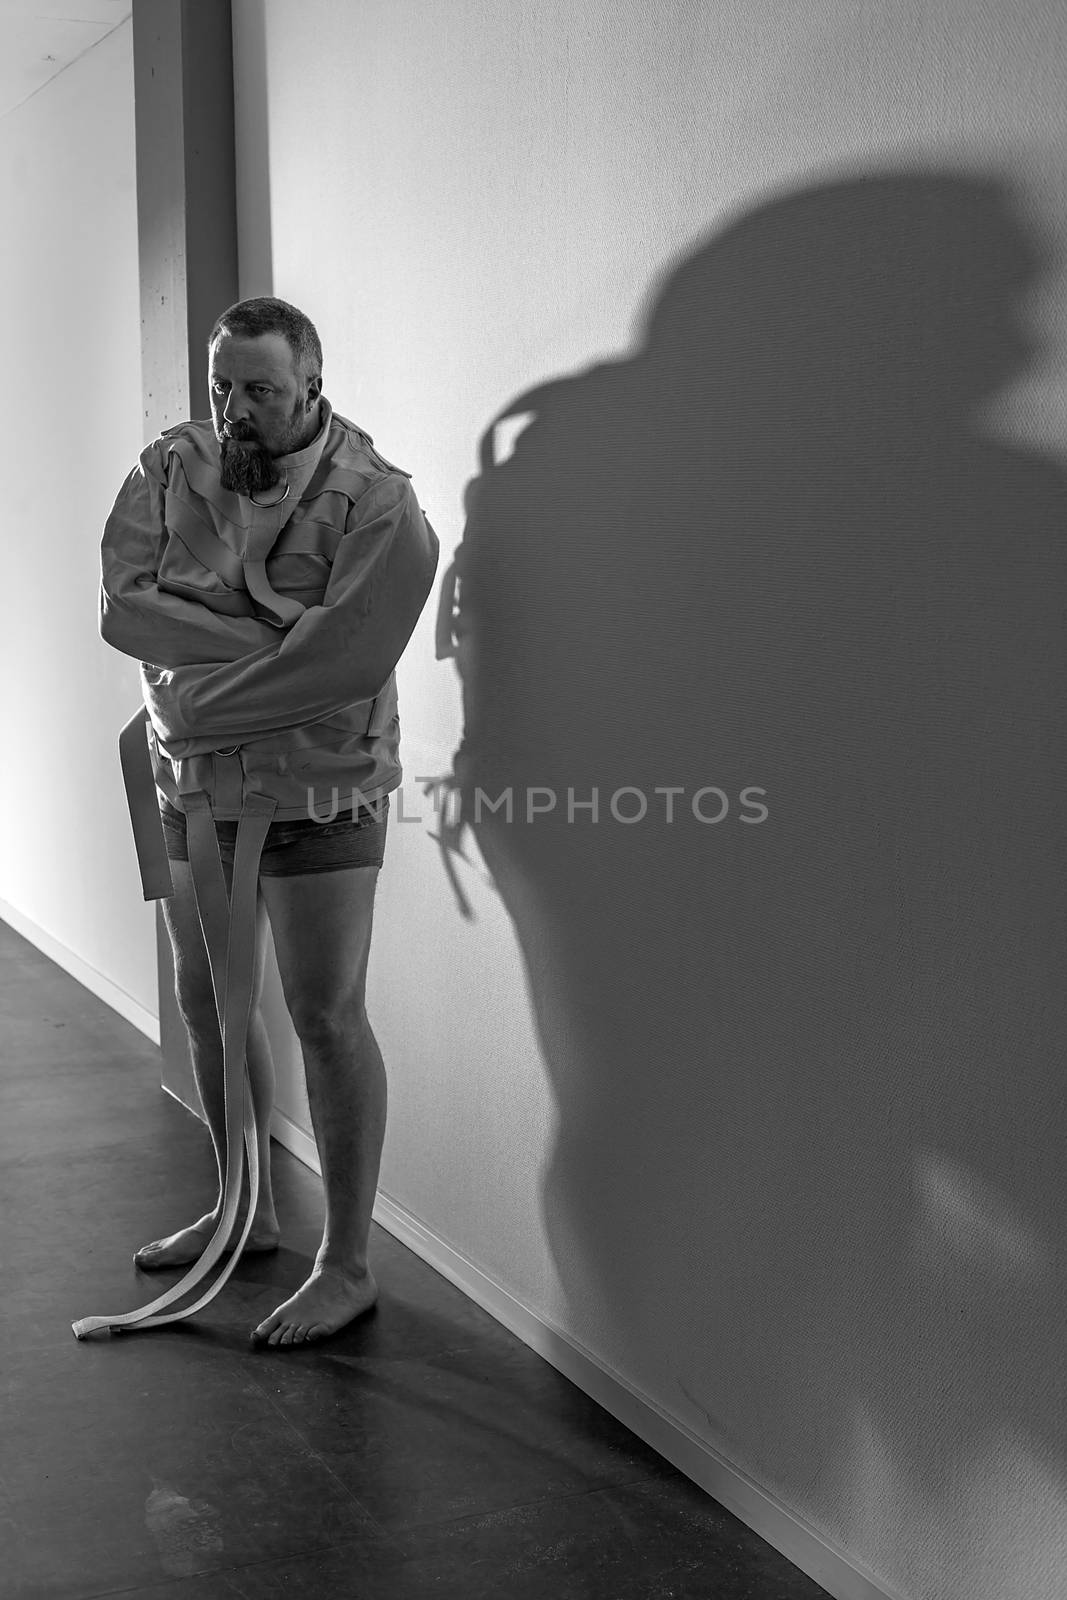 Photo of an insane man in his forties wearing a straitjacket standing in a hallway of an asylum.